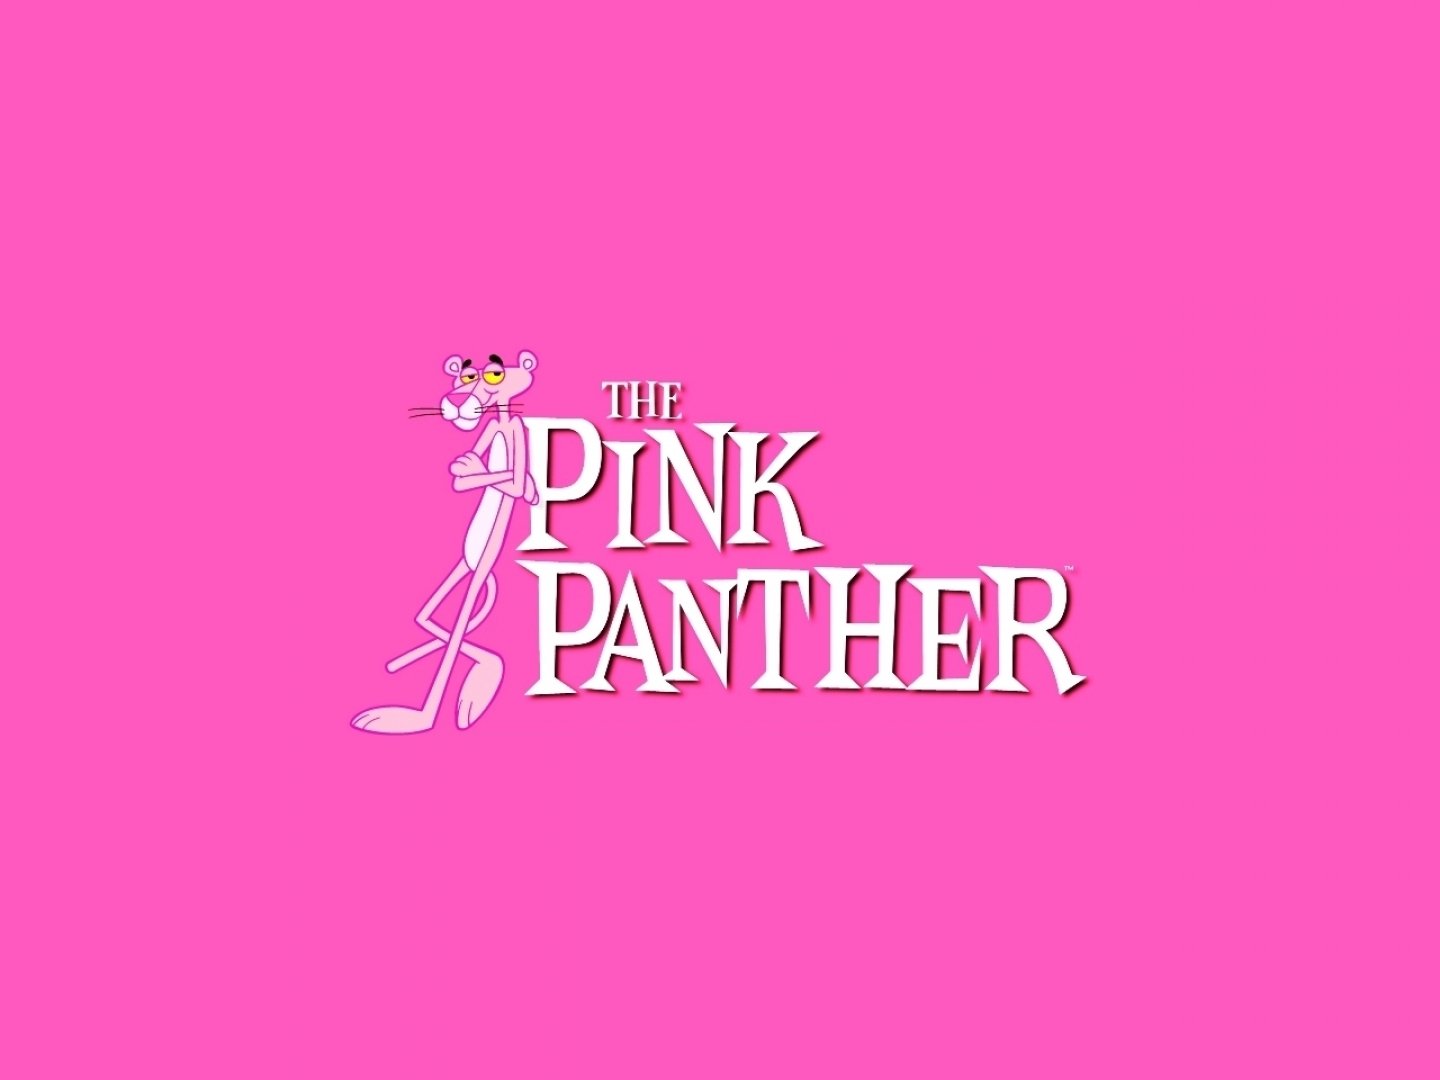 The Pink Panther Show Wallpaper And Hintergrund 1440x1080